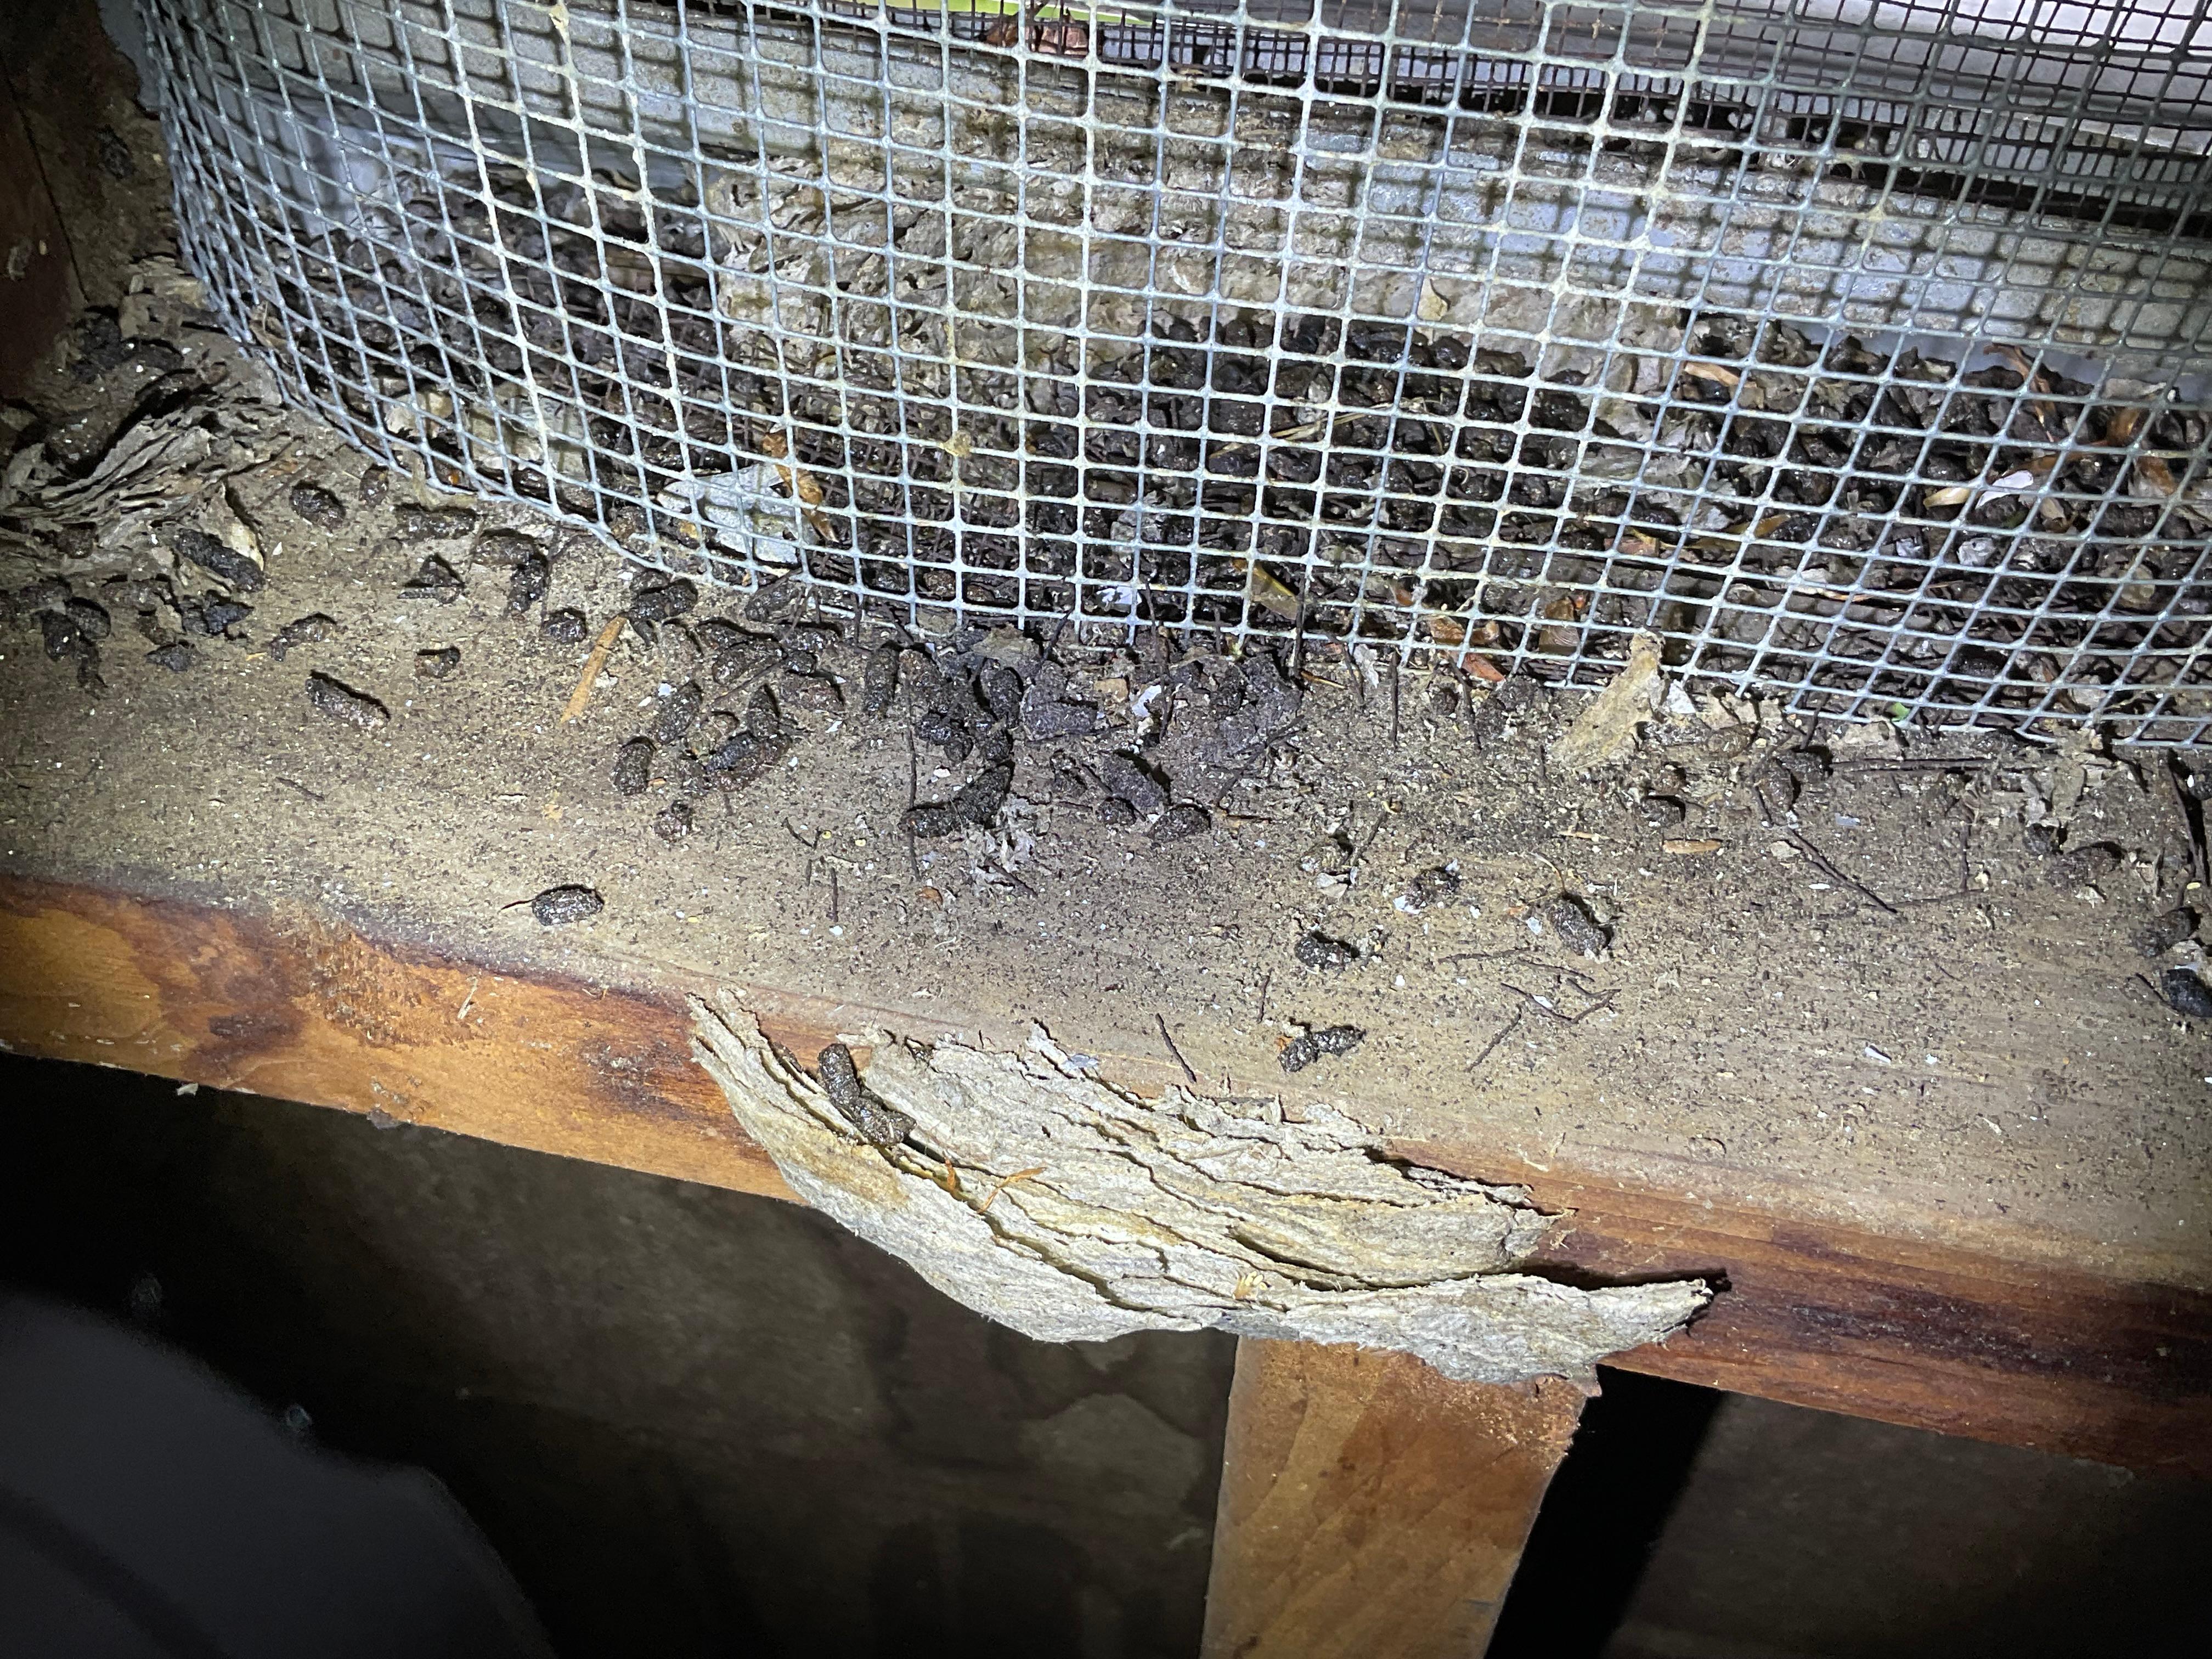 Pest droppings in an attic